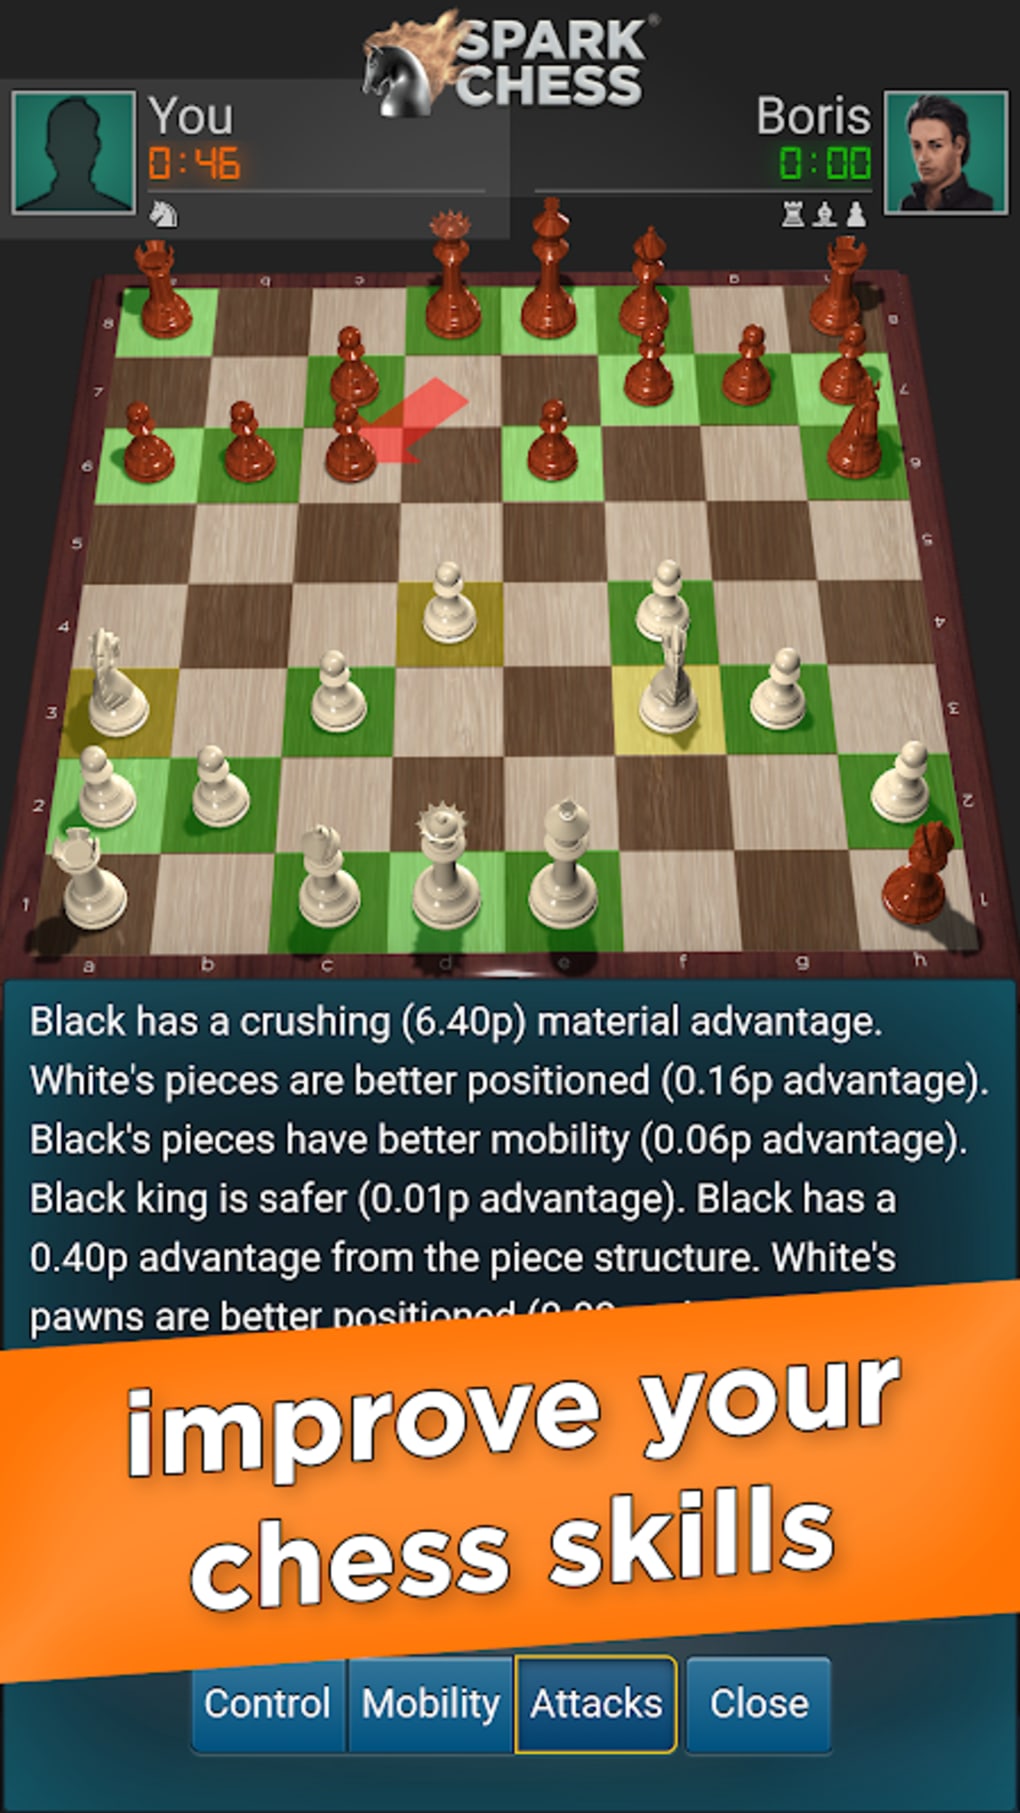 Sponsored Game Review: SparkChess